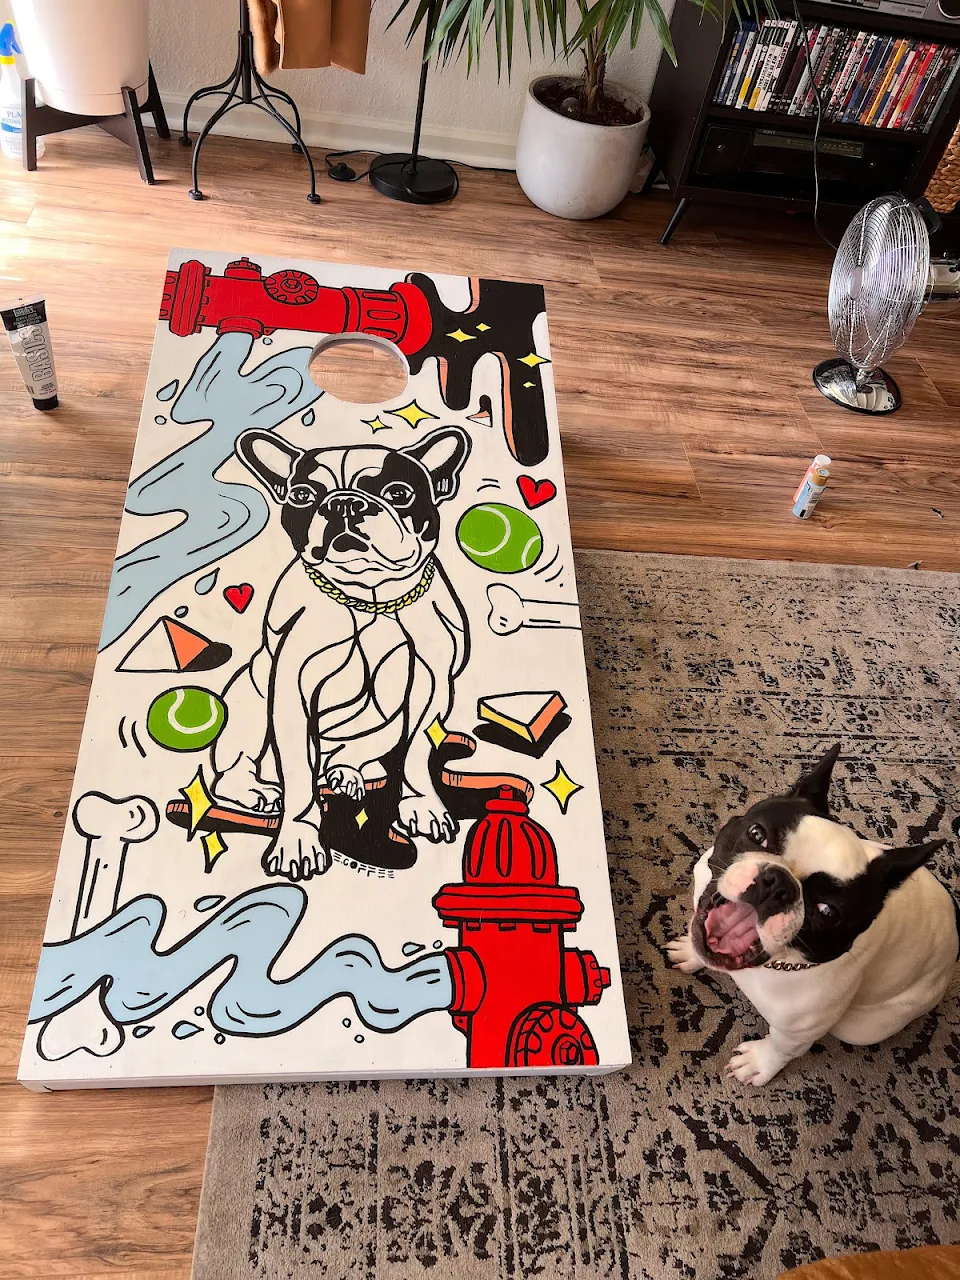 I painted my dog on one of our corn hole boards this weekend. This is the big reveal: